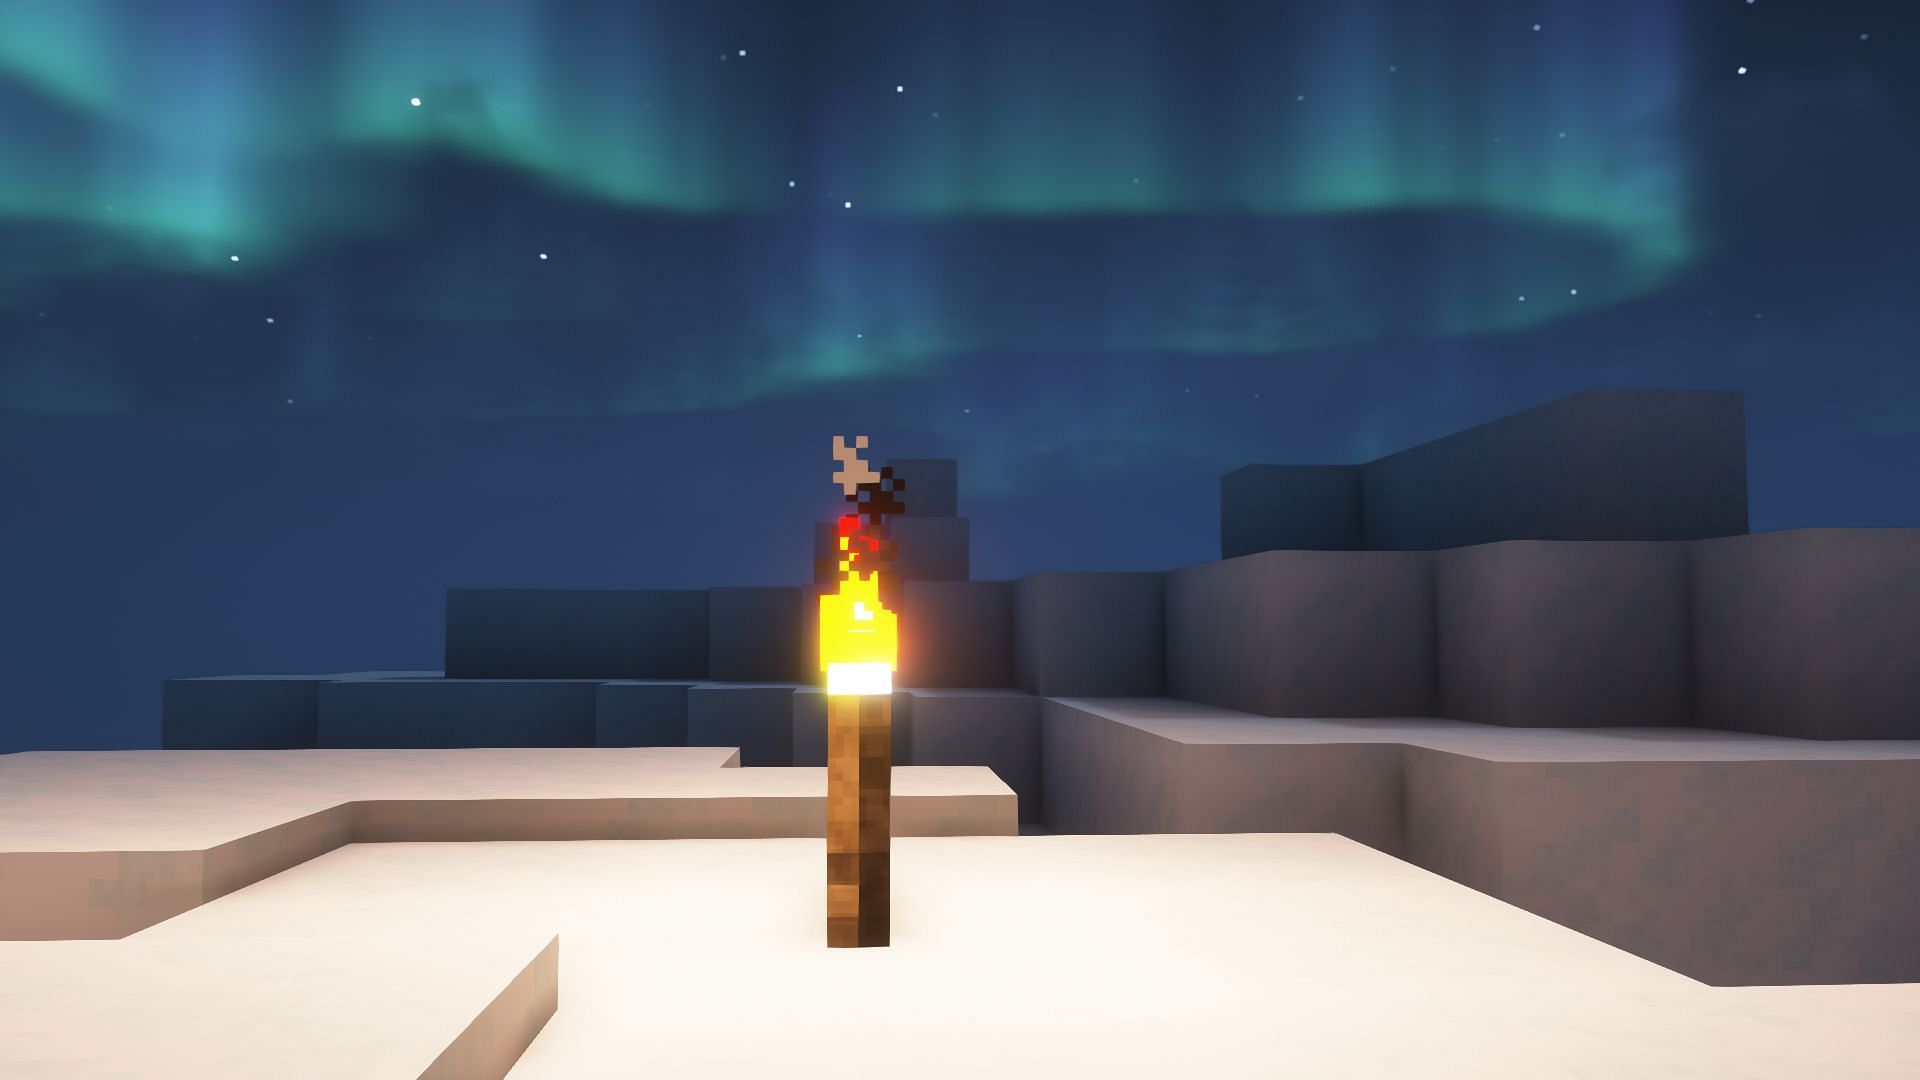 Minecraft Redditor died by colliding with torch while falling down (Image via Mojang)